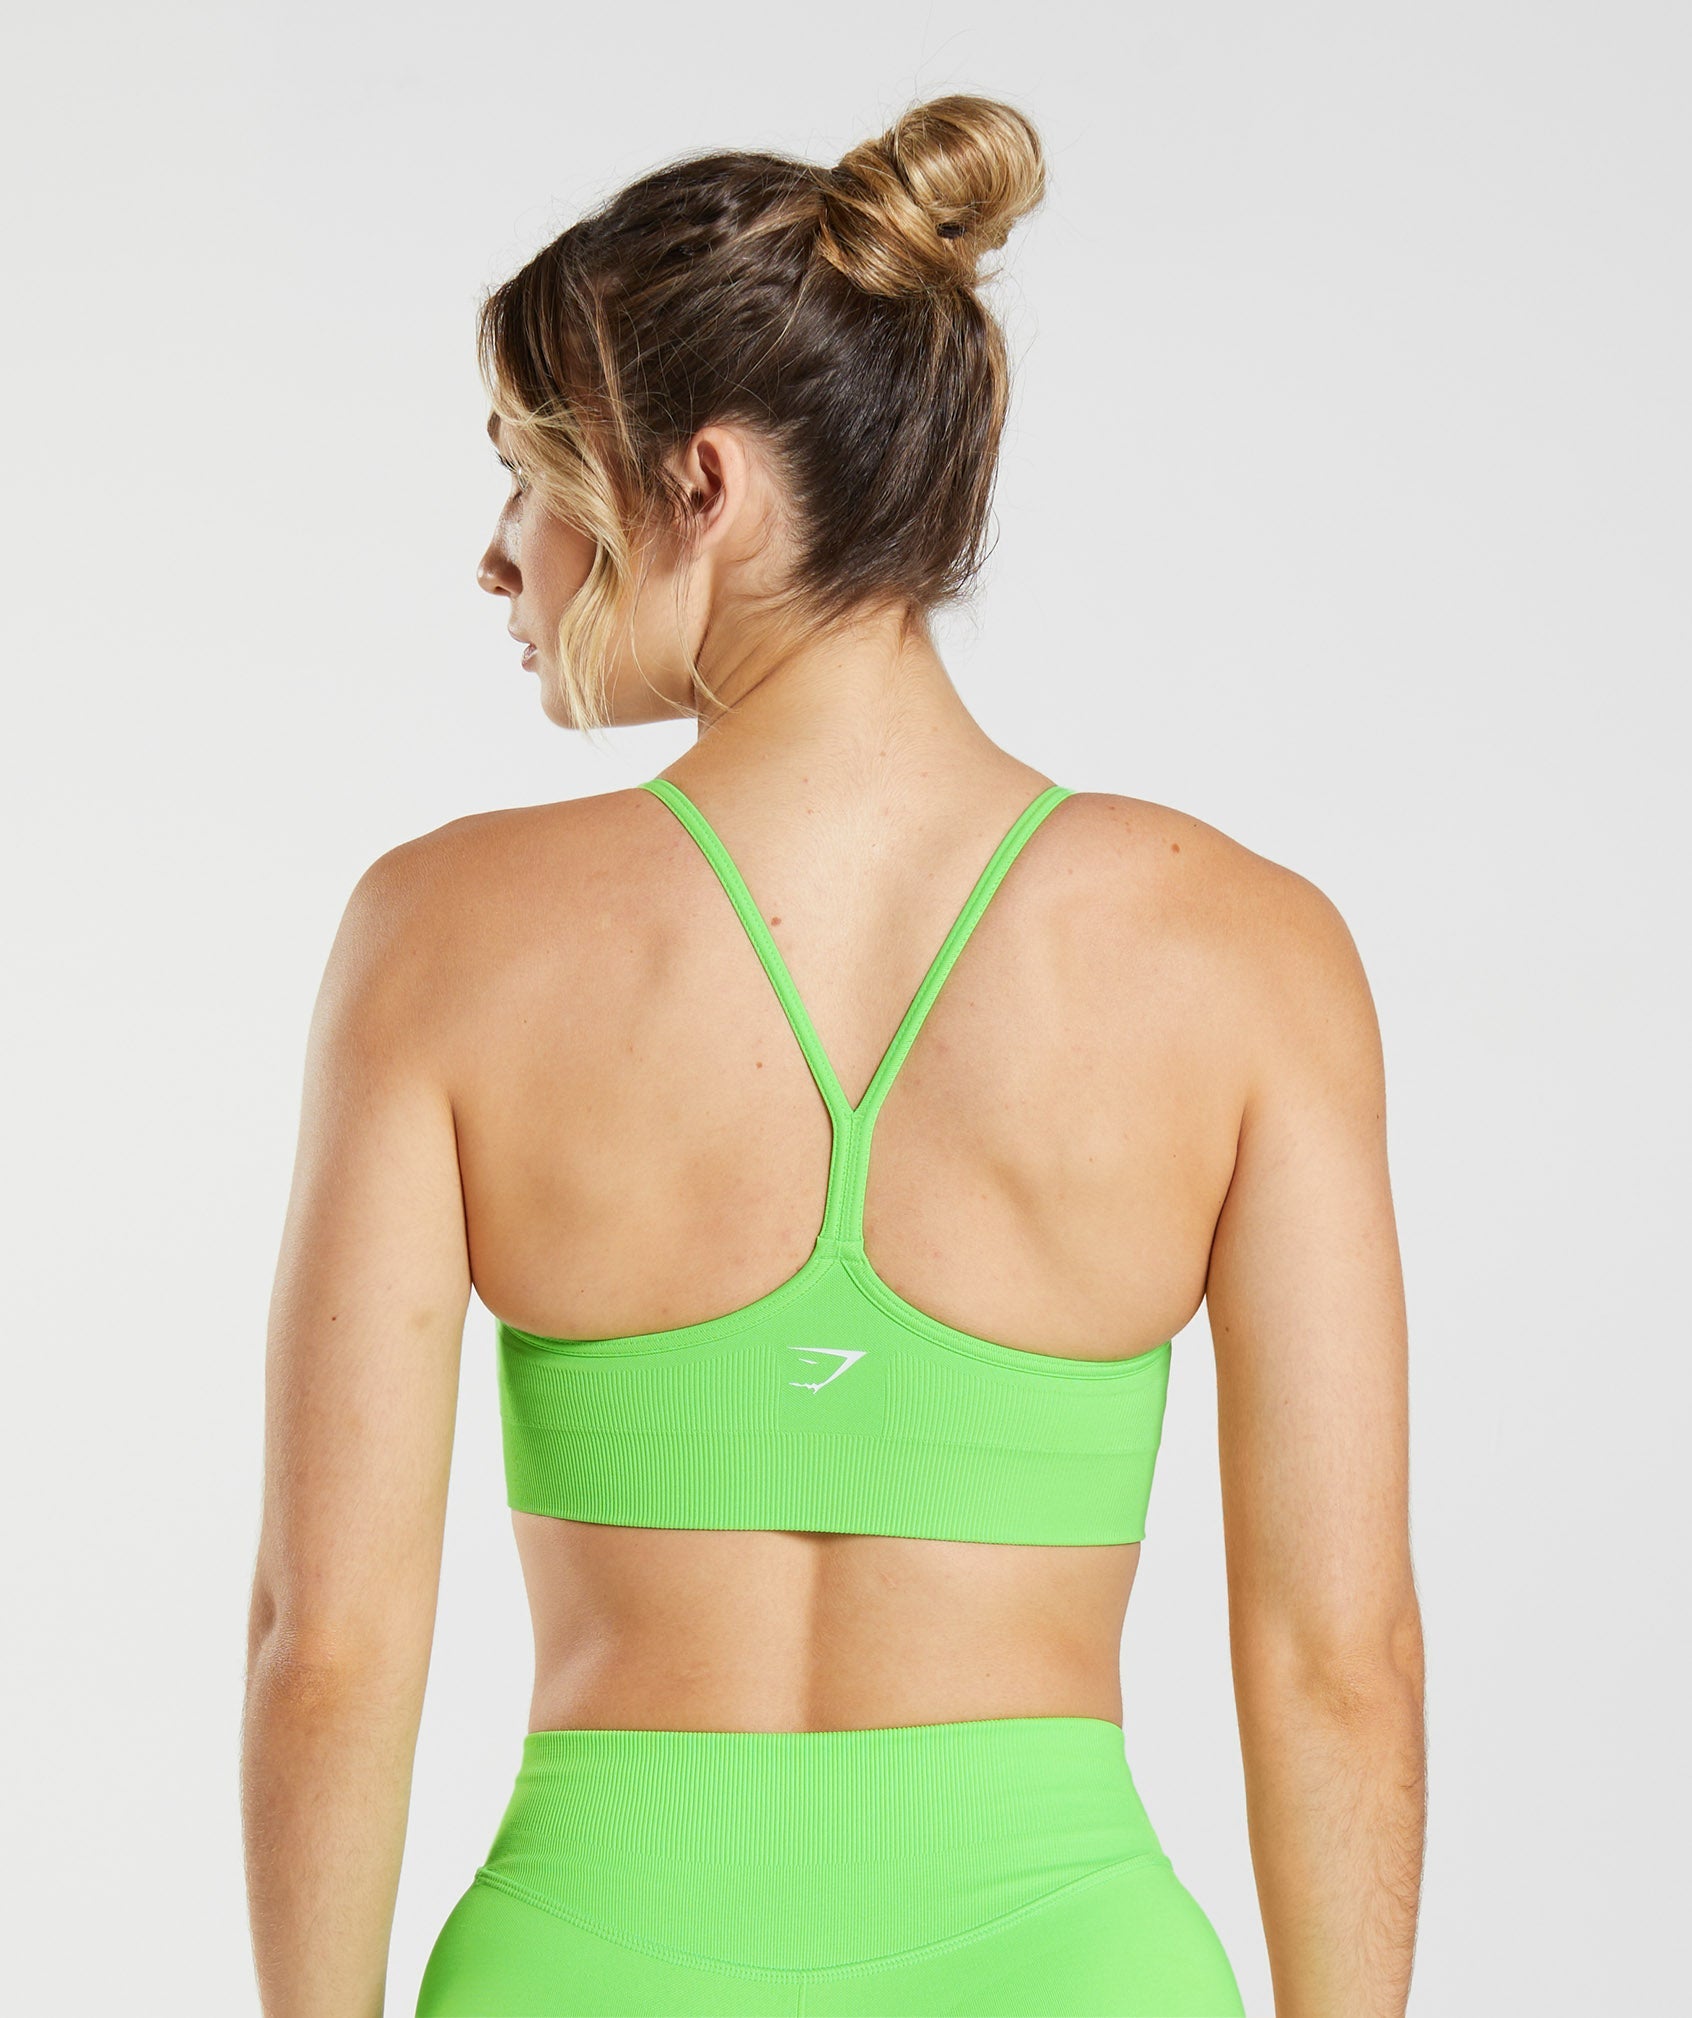 Sweat Seamless Sports Bra in Fluo Lime - view 2